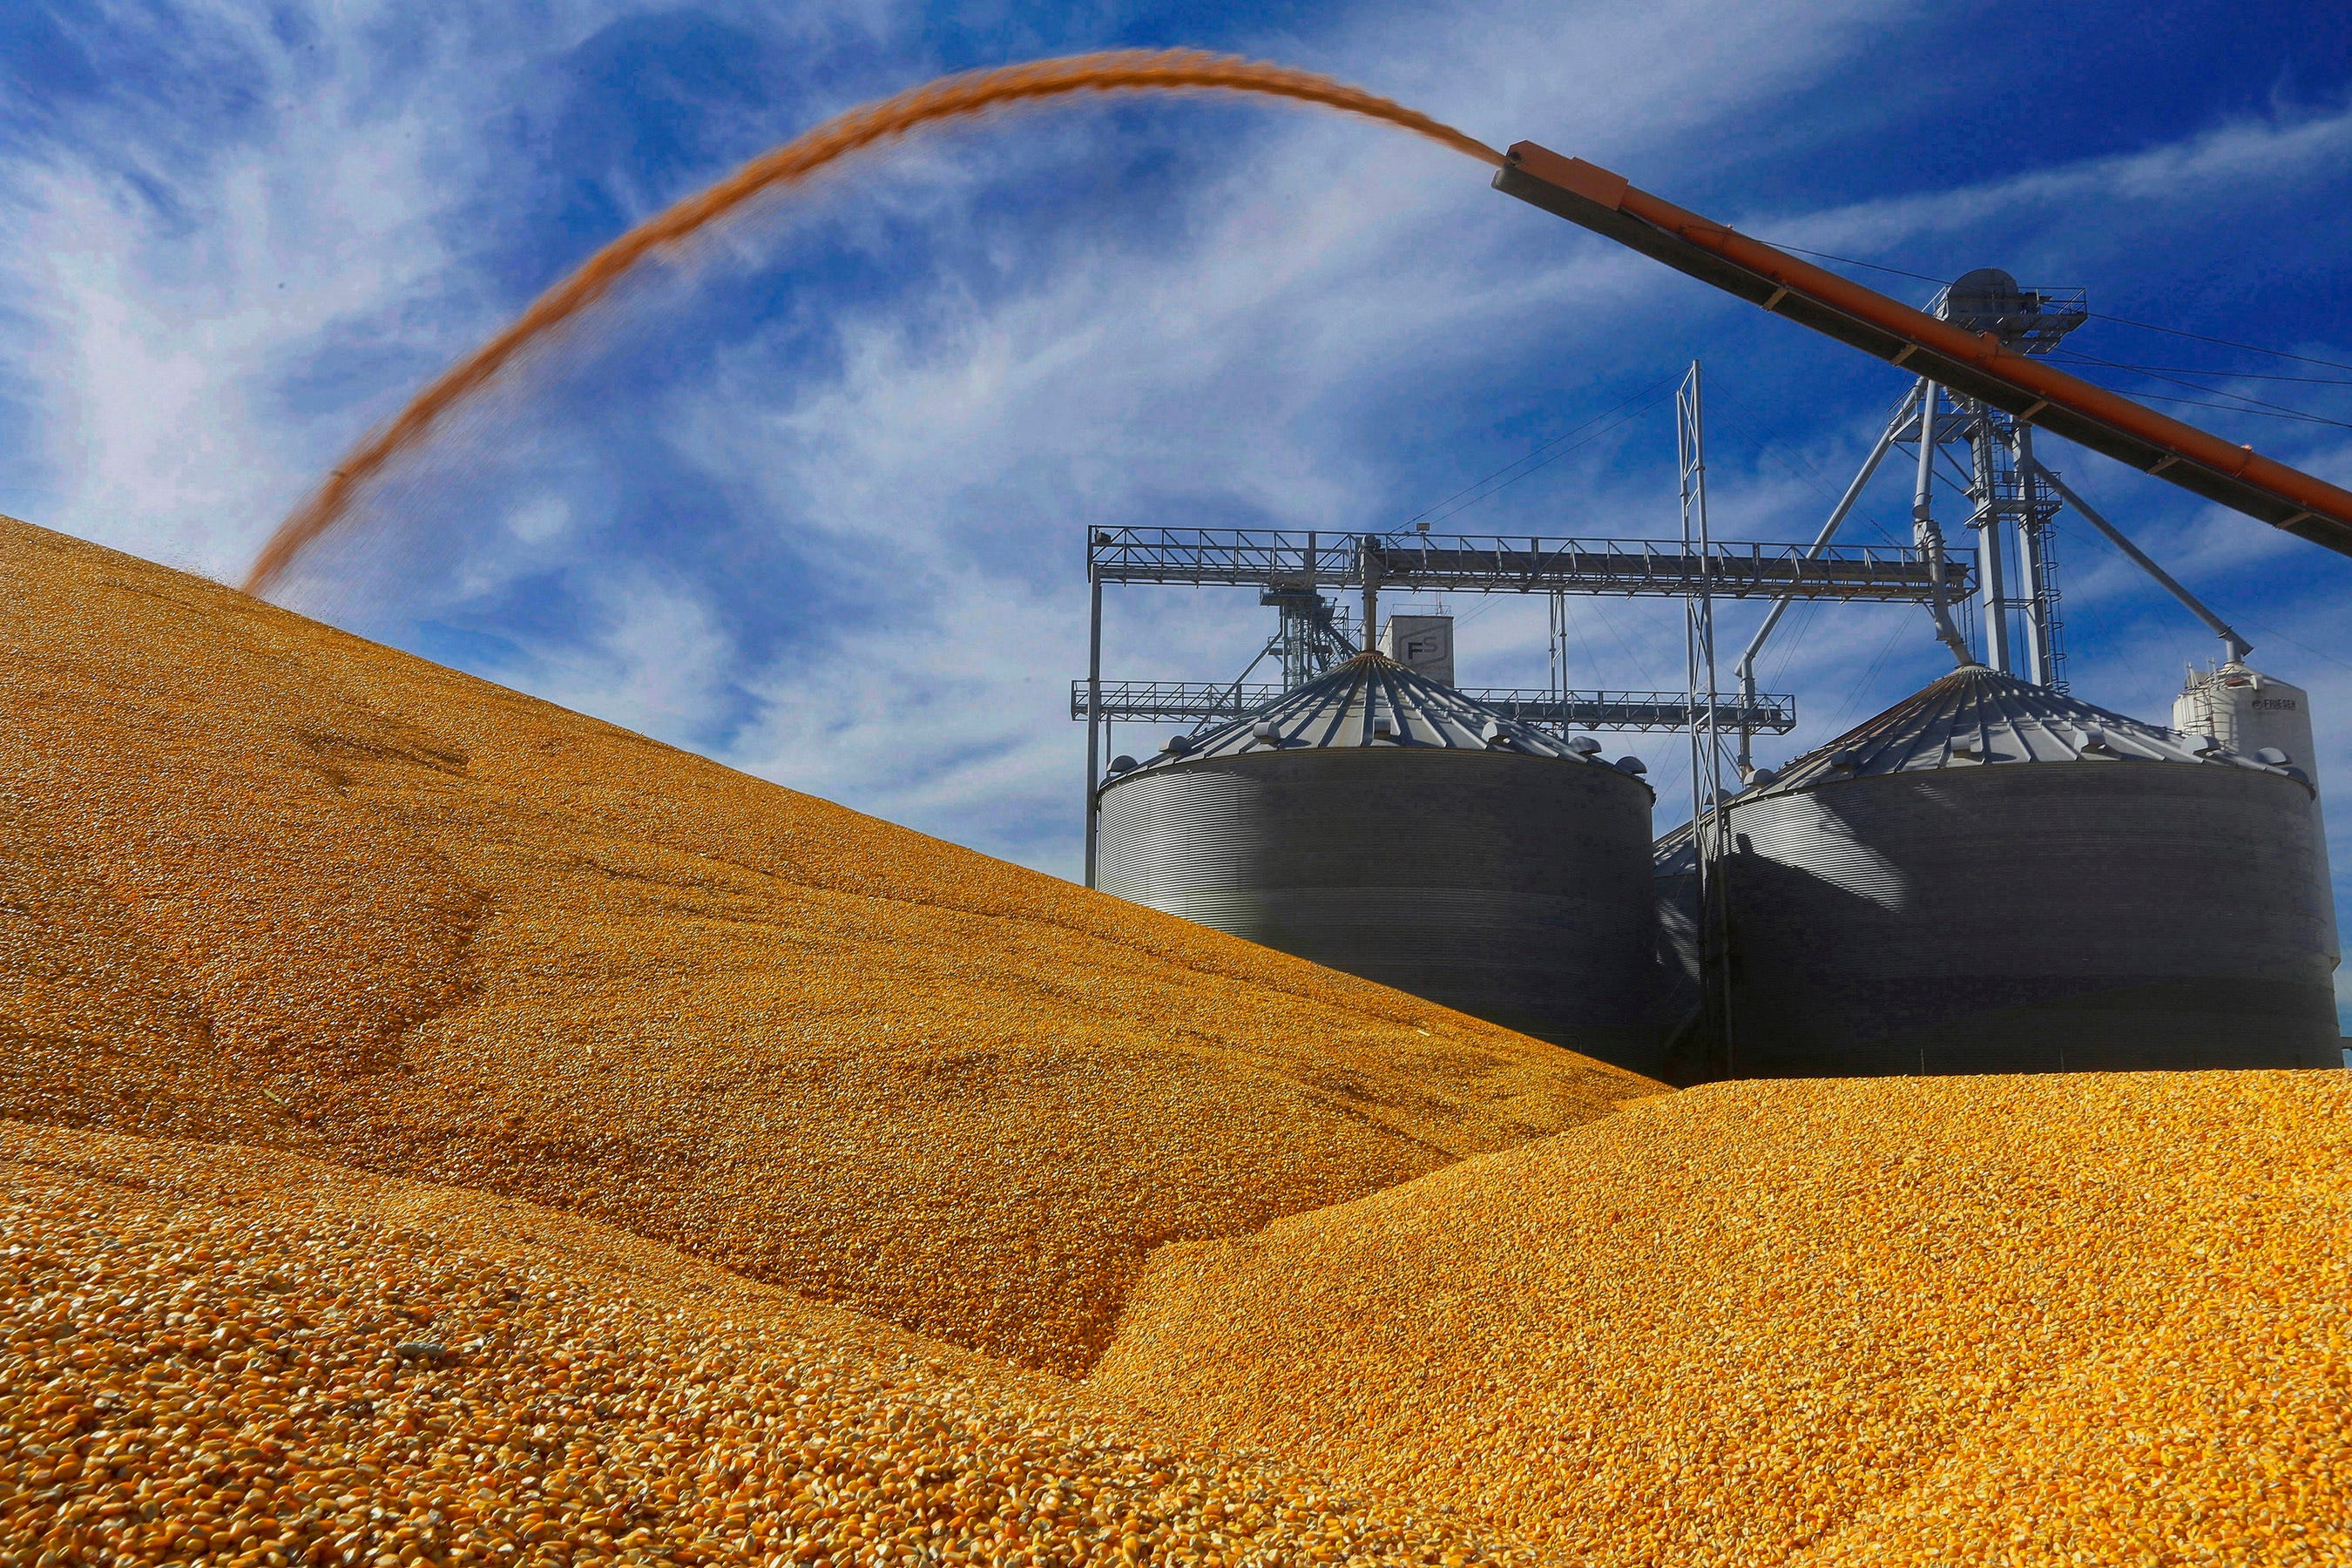 Factors that have affected the grain markets for the last year are still in play and “volatility is here to stay,” says a market analyst.